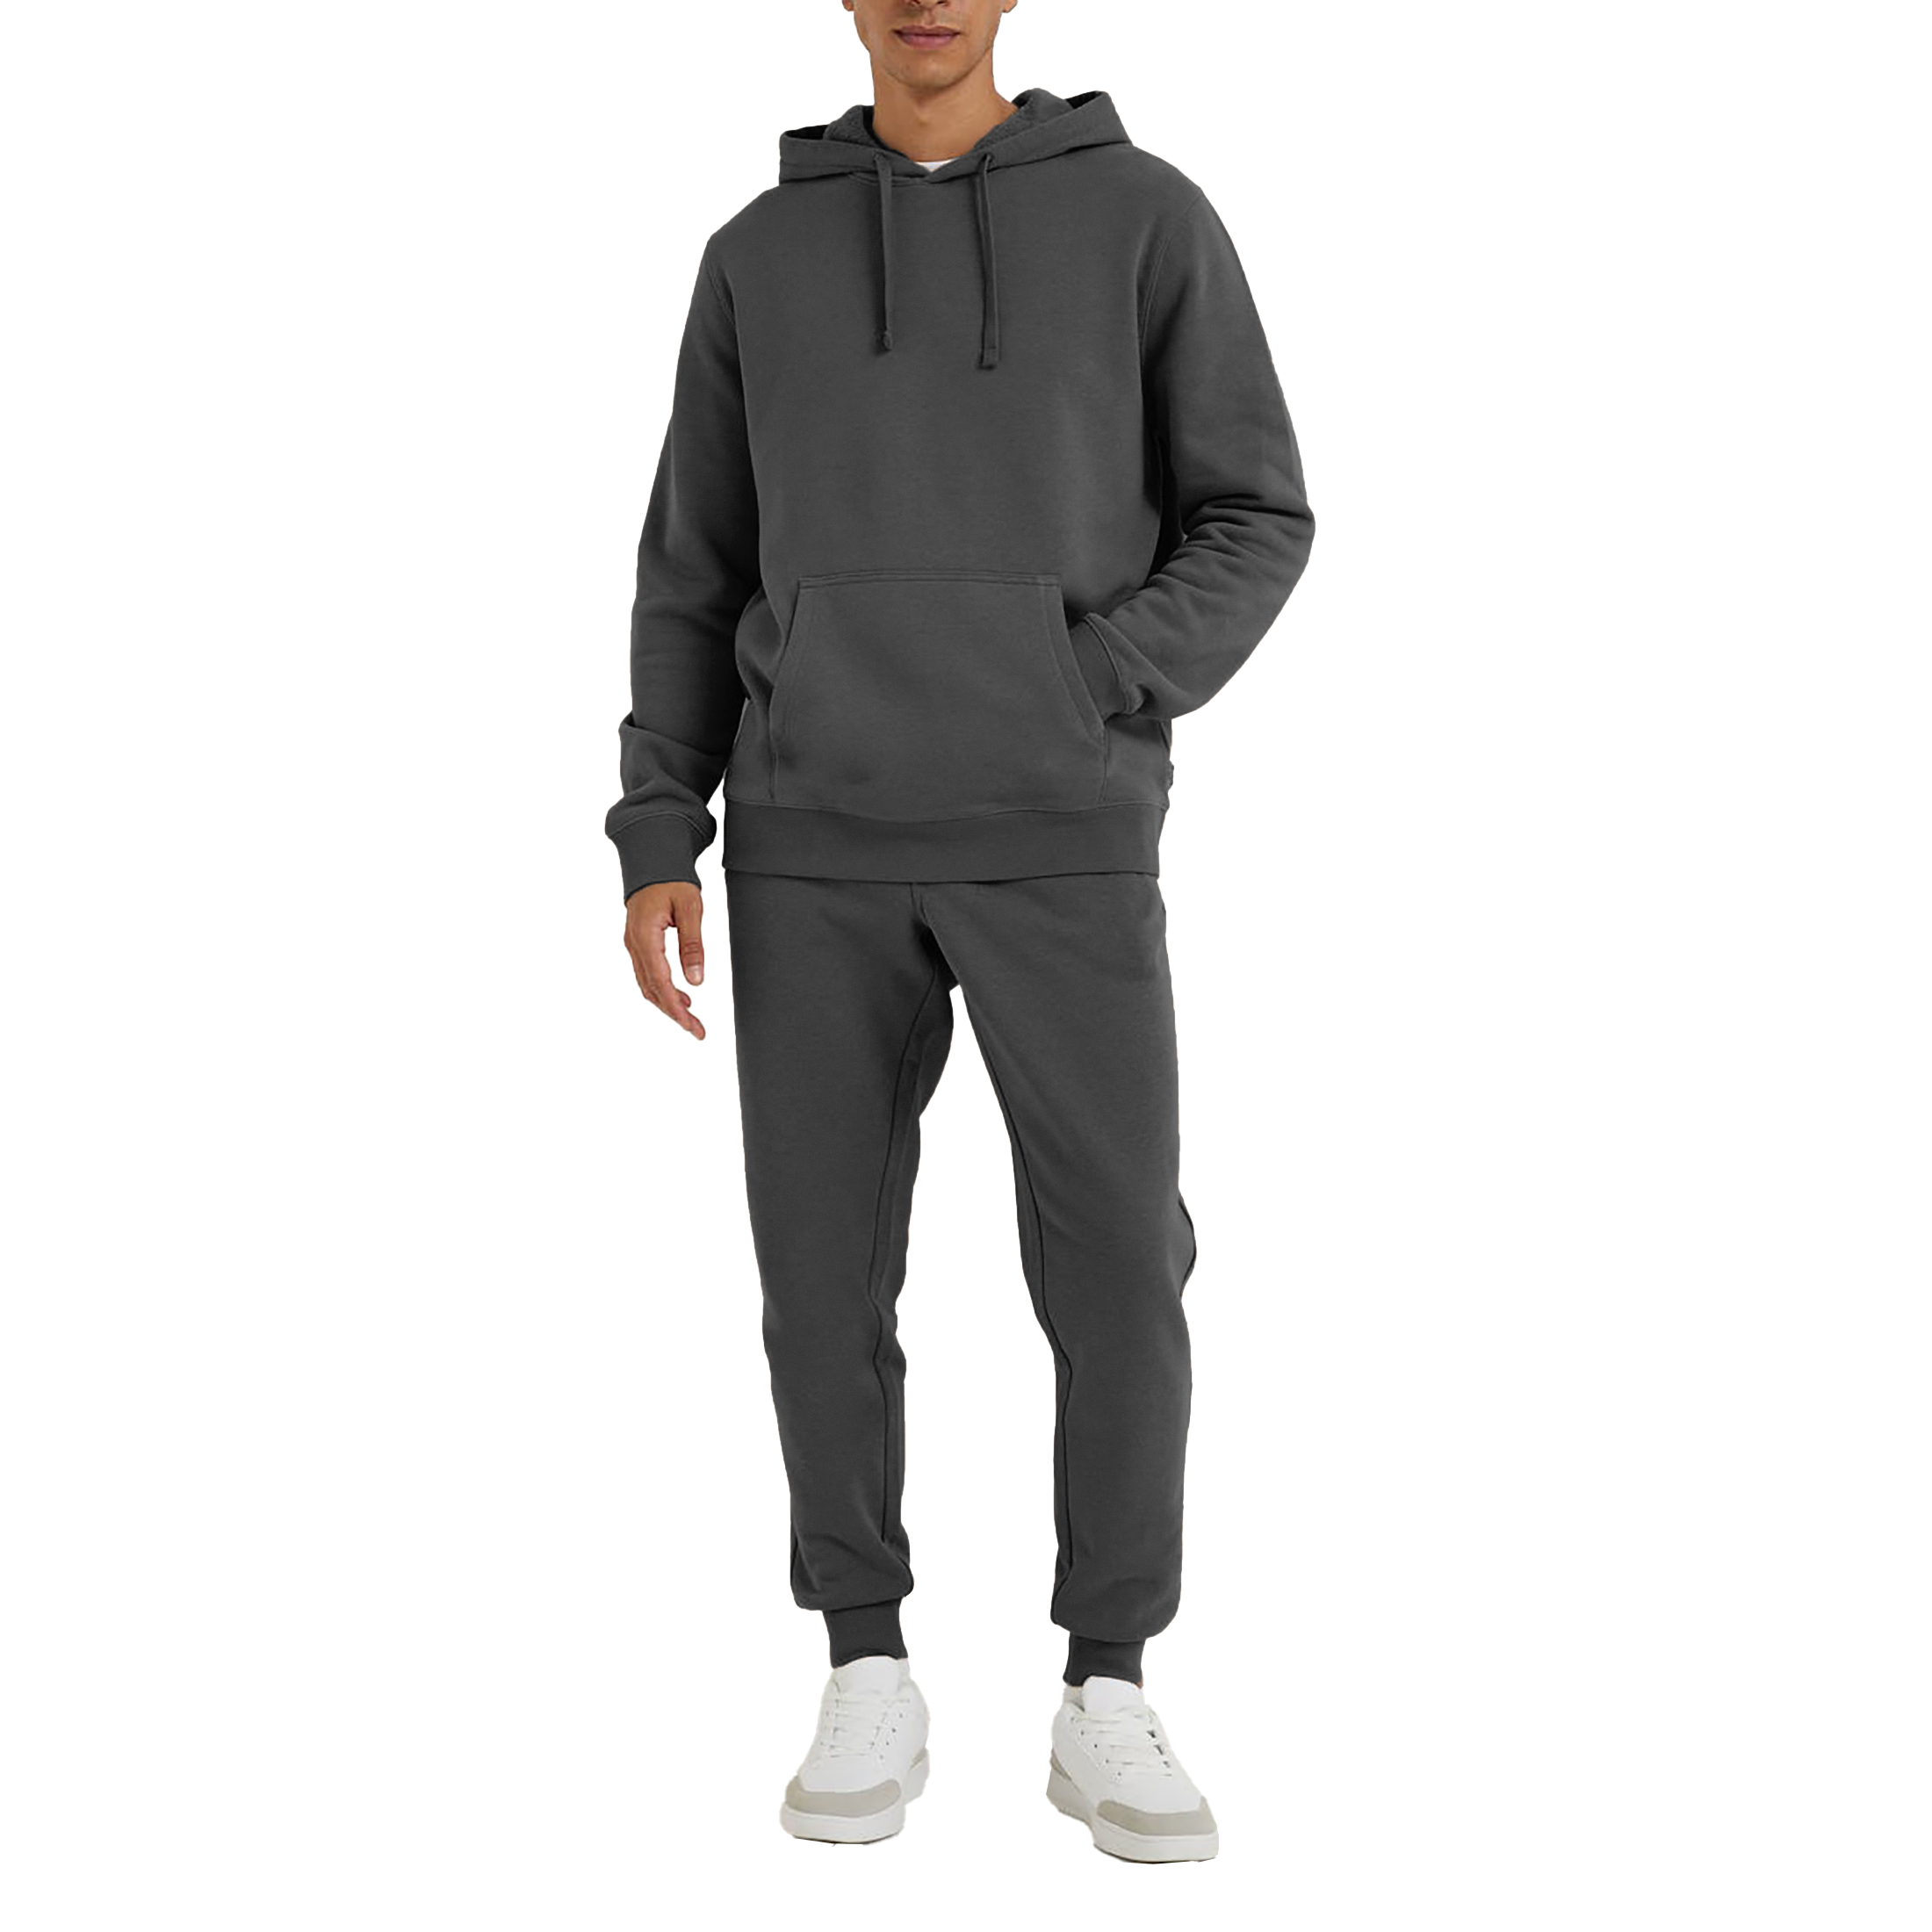 Men's Athletic Warm Jogging Pullover Active Tracksuit - Charcoal, Large